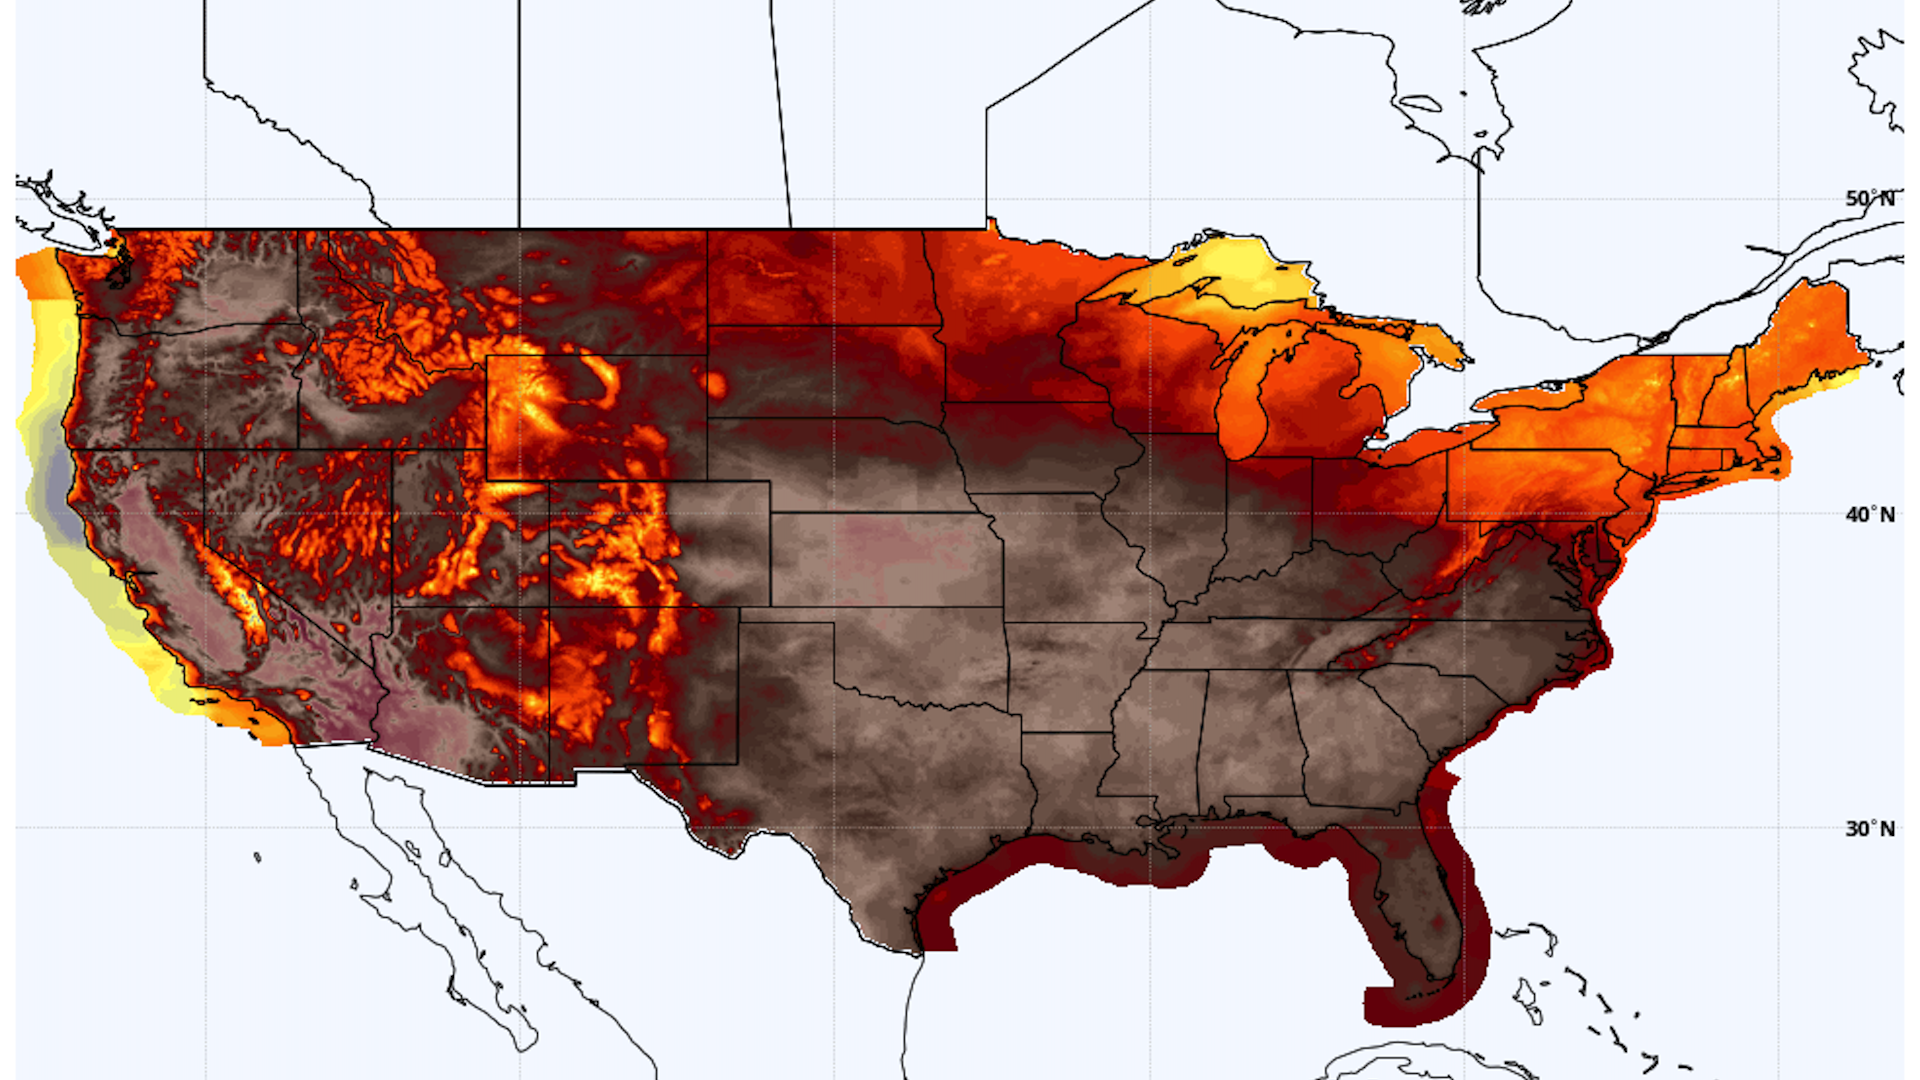 Weather map with dark red colors showing the hottest temperatures across the U.S.